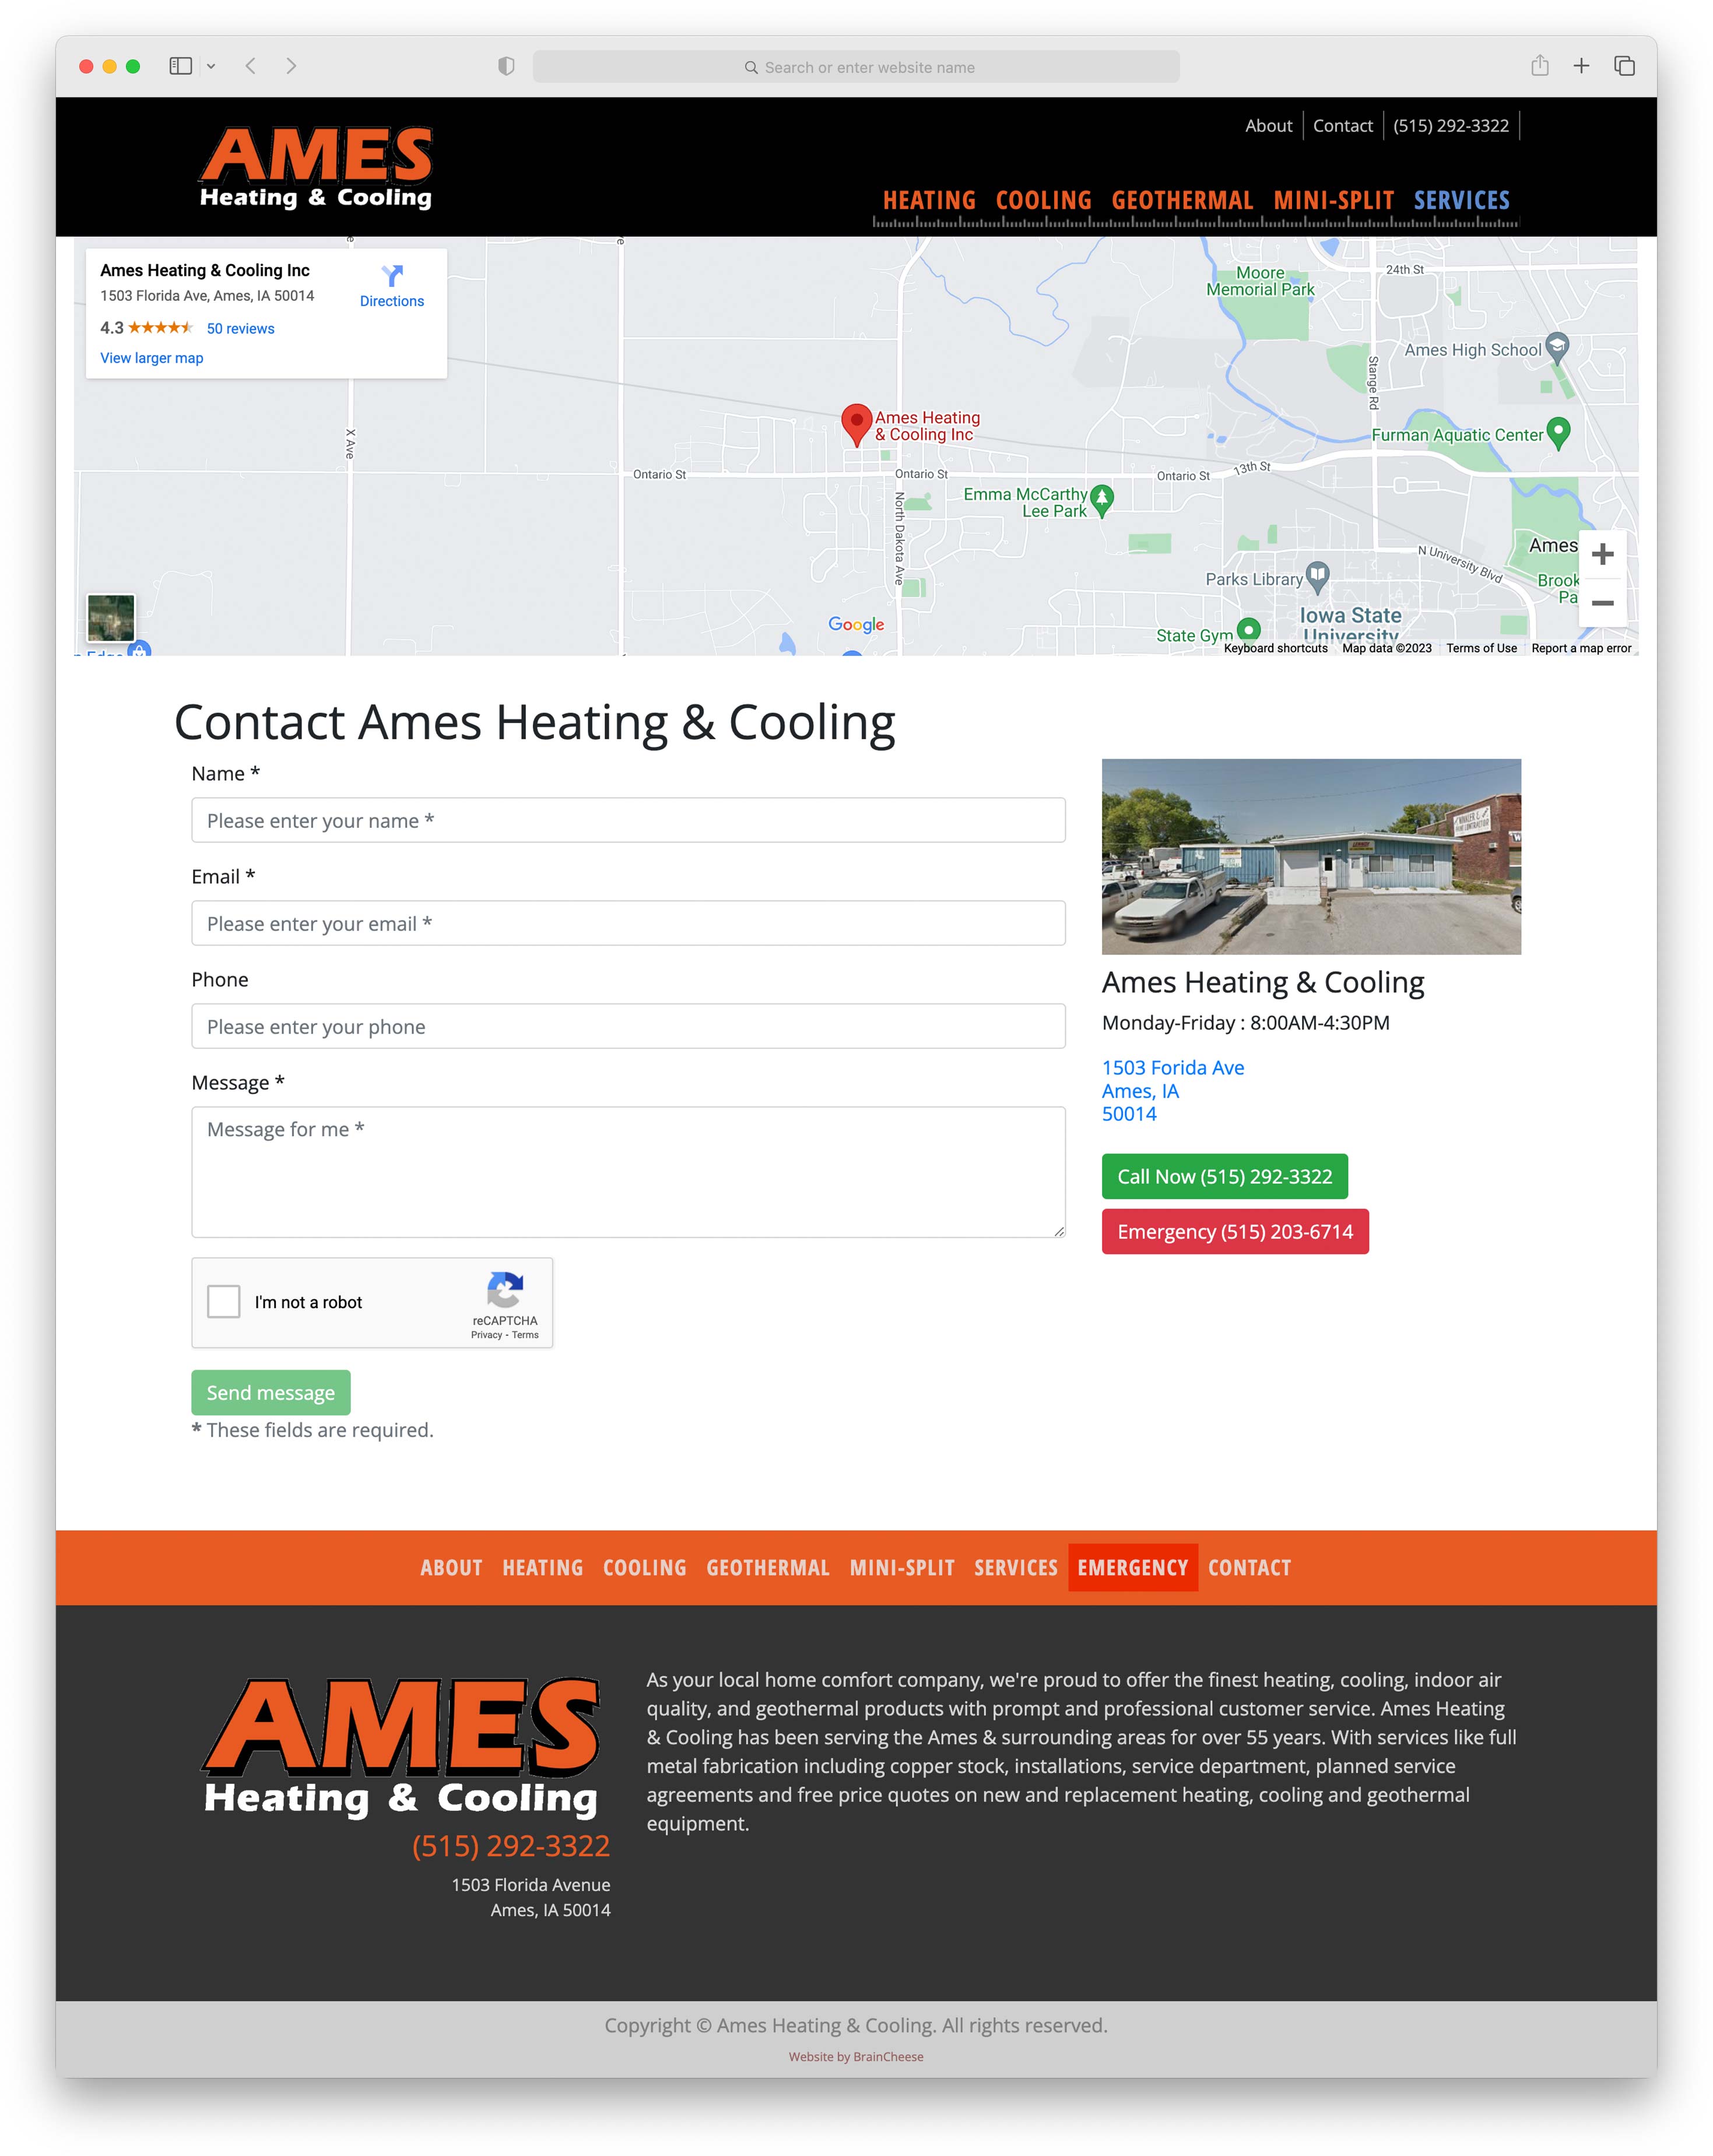 Ames Heating & Cooling Contact Page